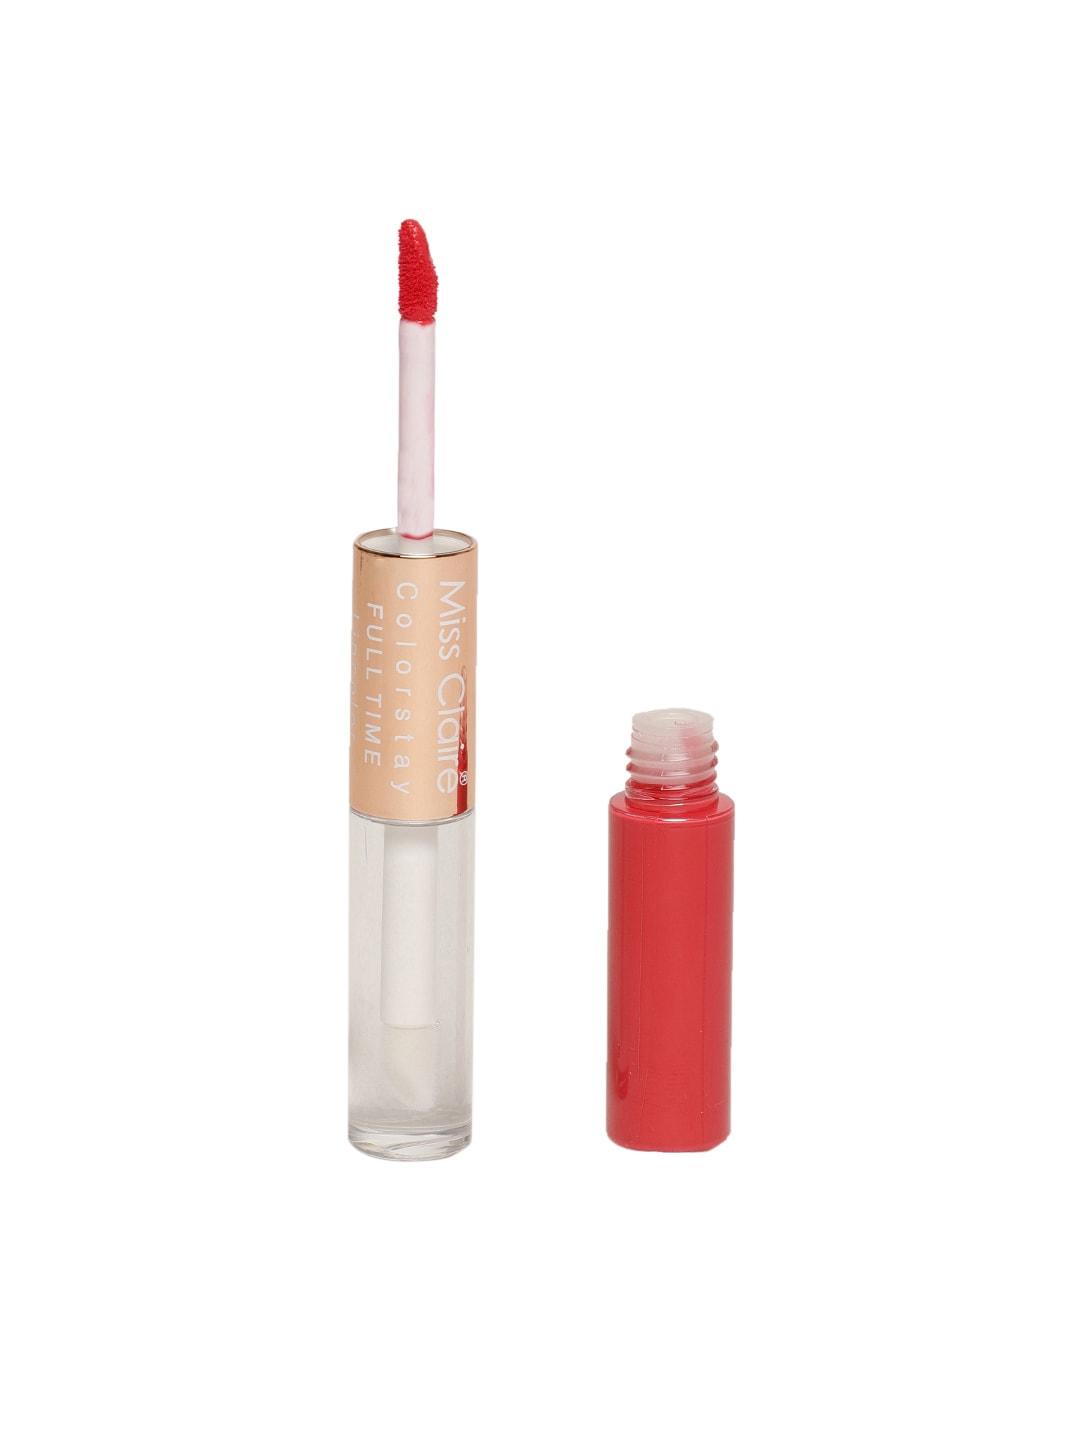 miss-claire-colorstay-full-time-7-lipcolor-10-ml